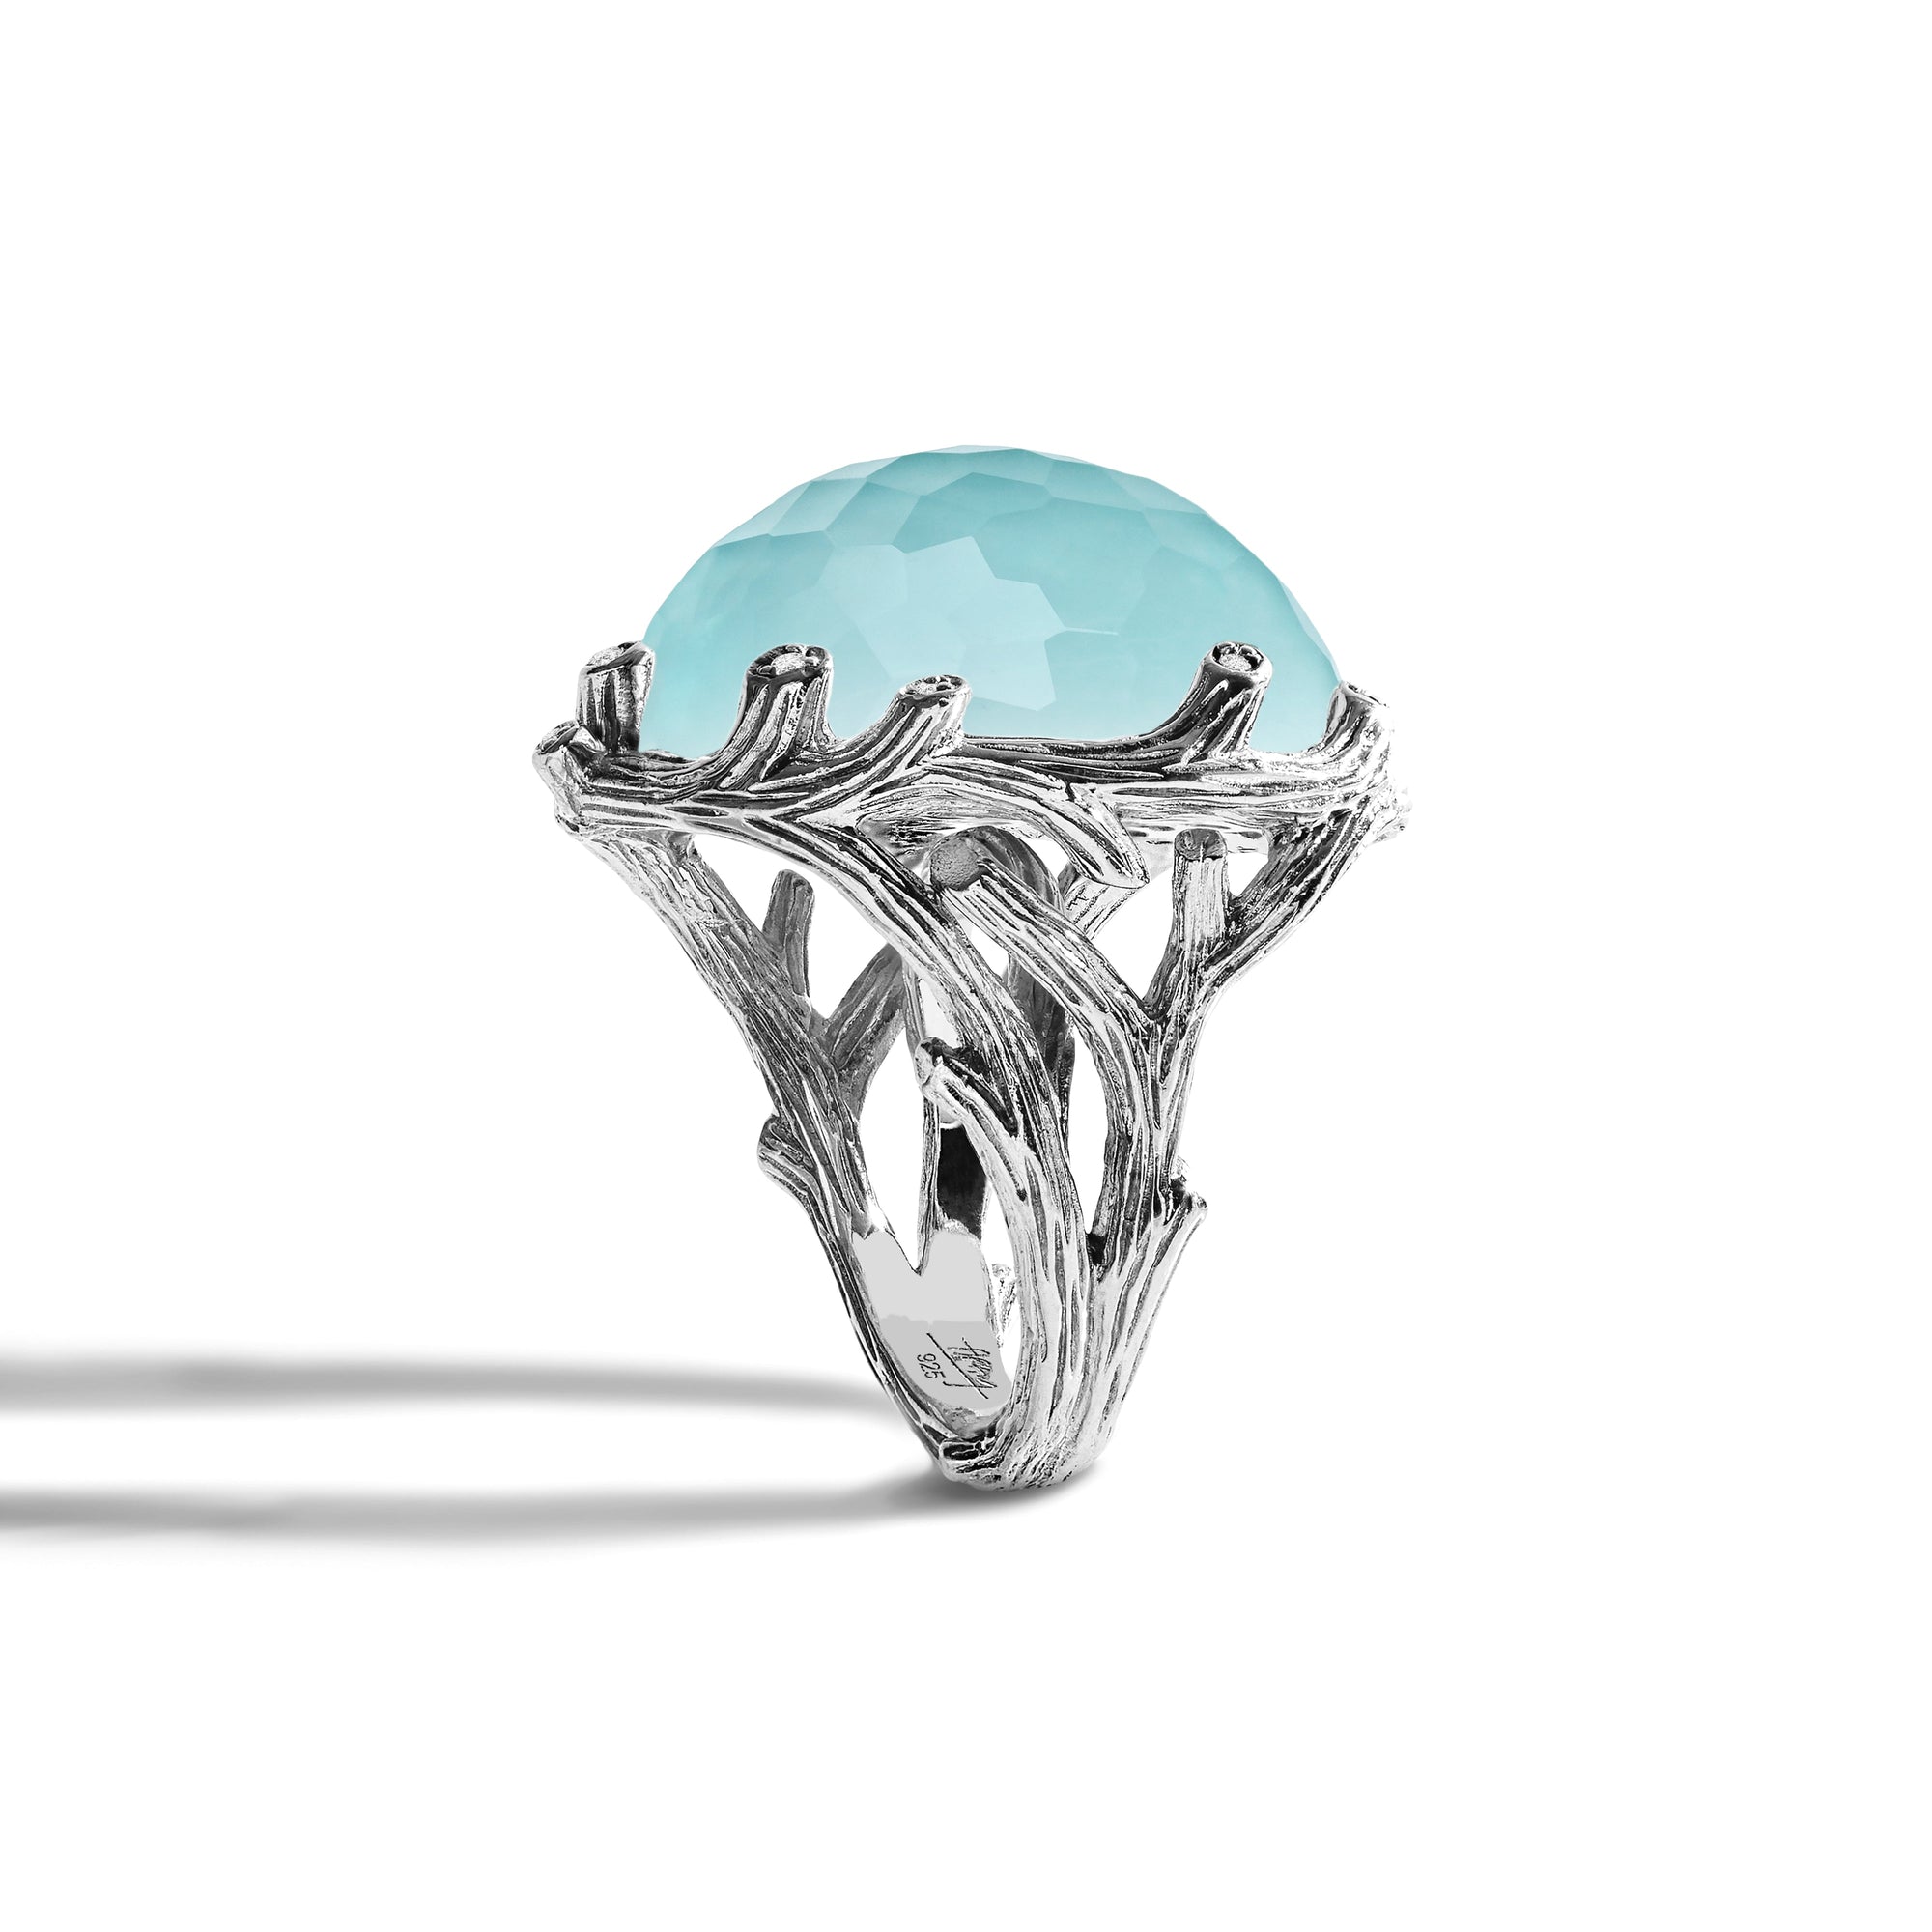 Michael Aram Enchanted Forest Ring with Turquoise Doublet and Diamonds